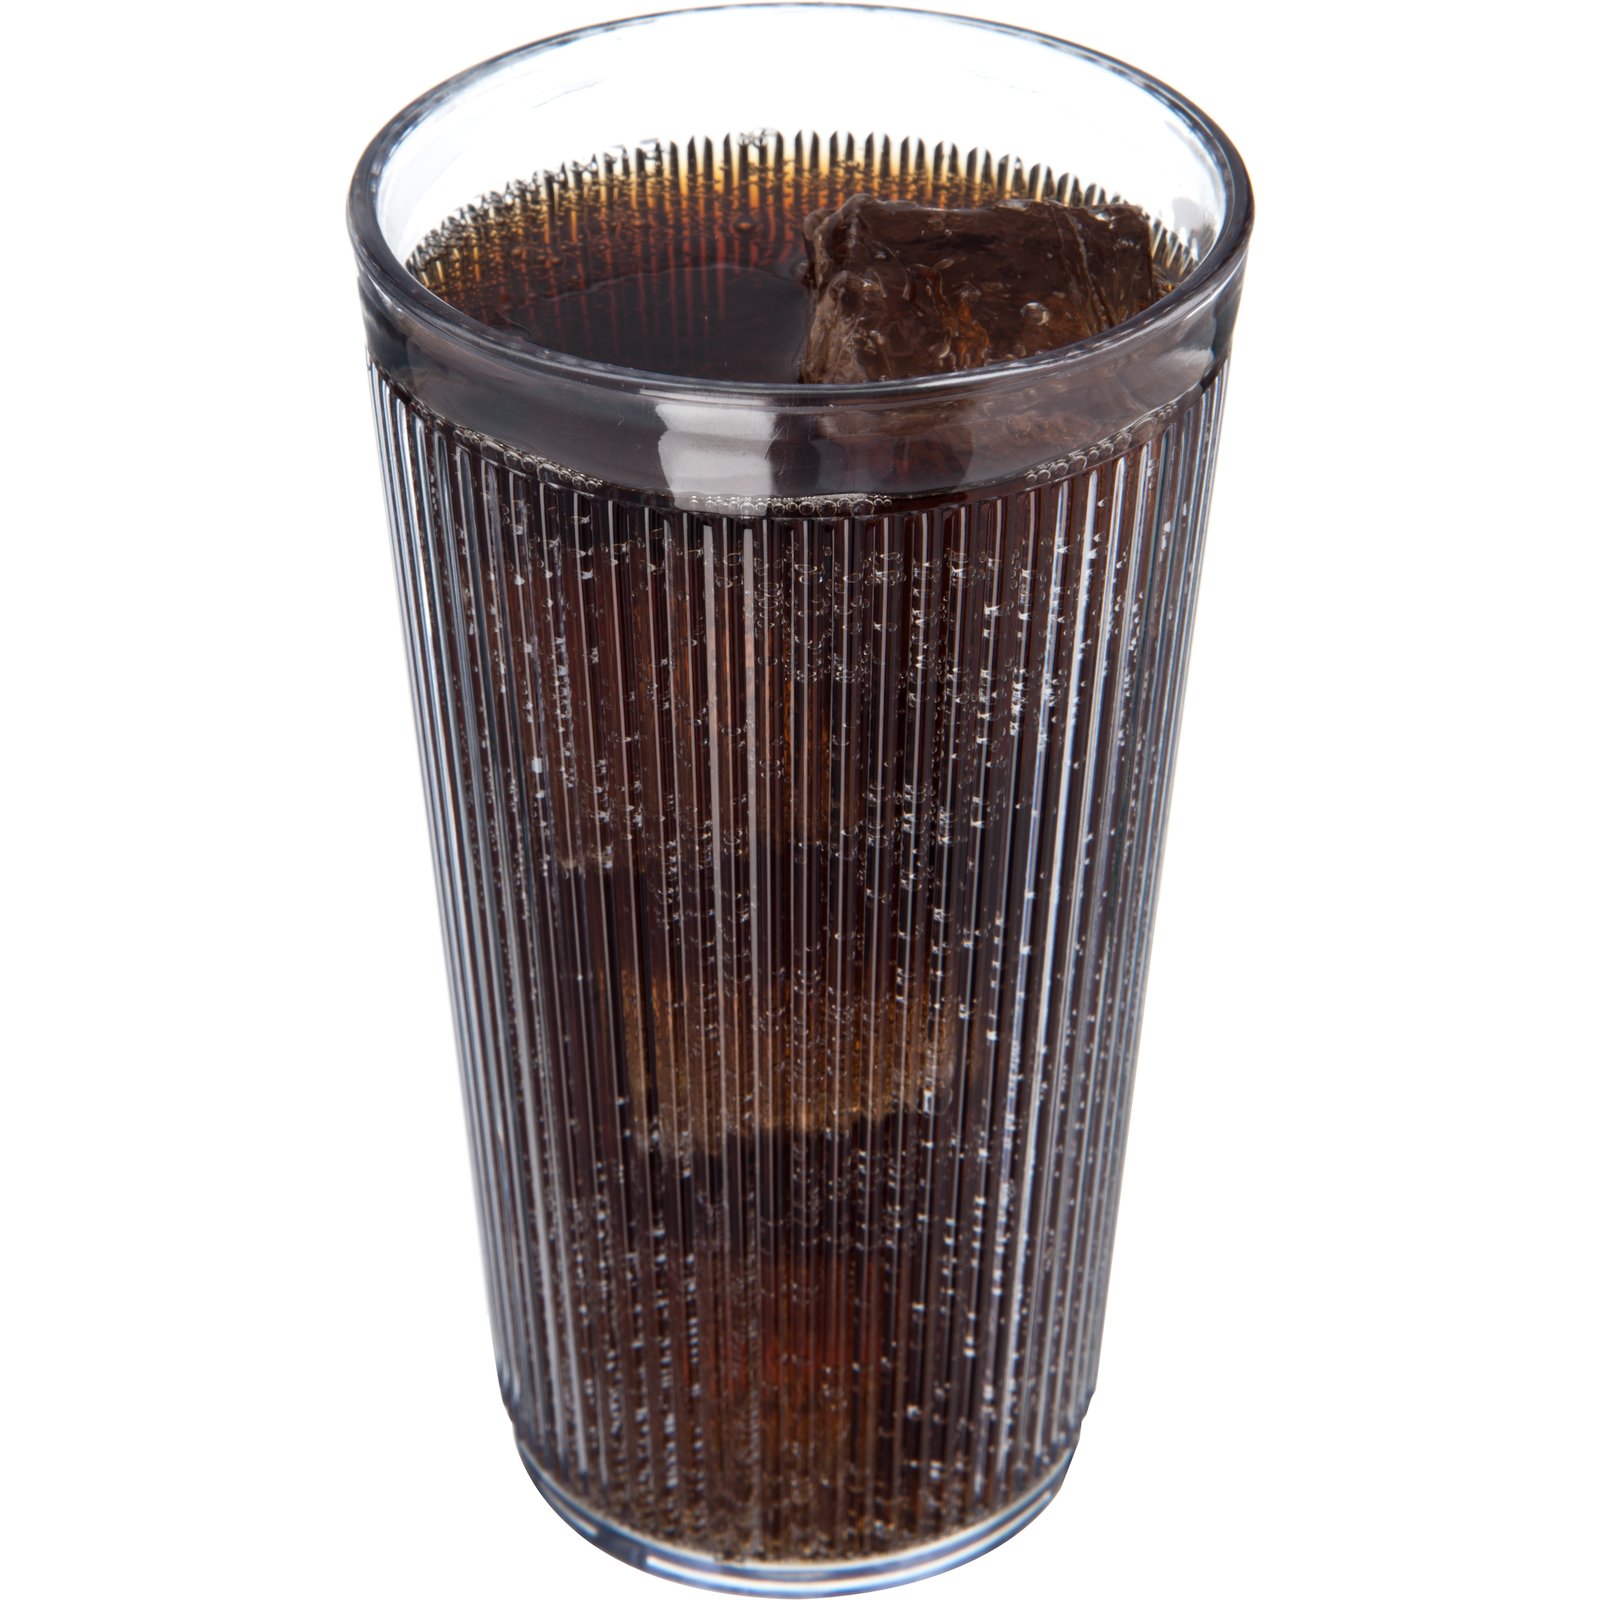 Stainless Steel 40oz Tumbler Cup - Black – RuiXing Shop